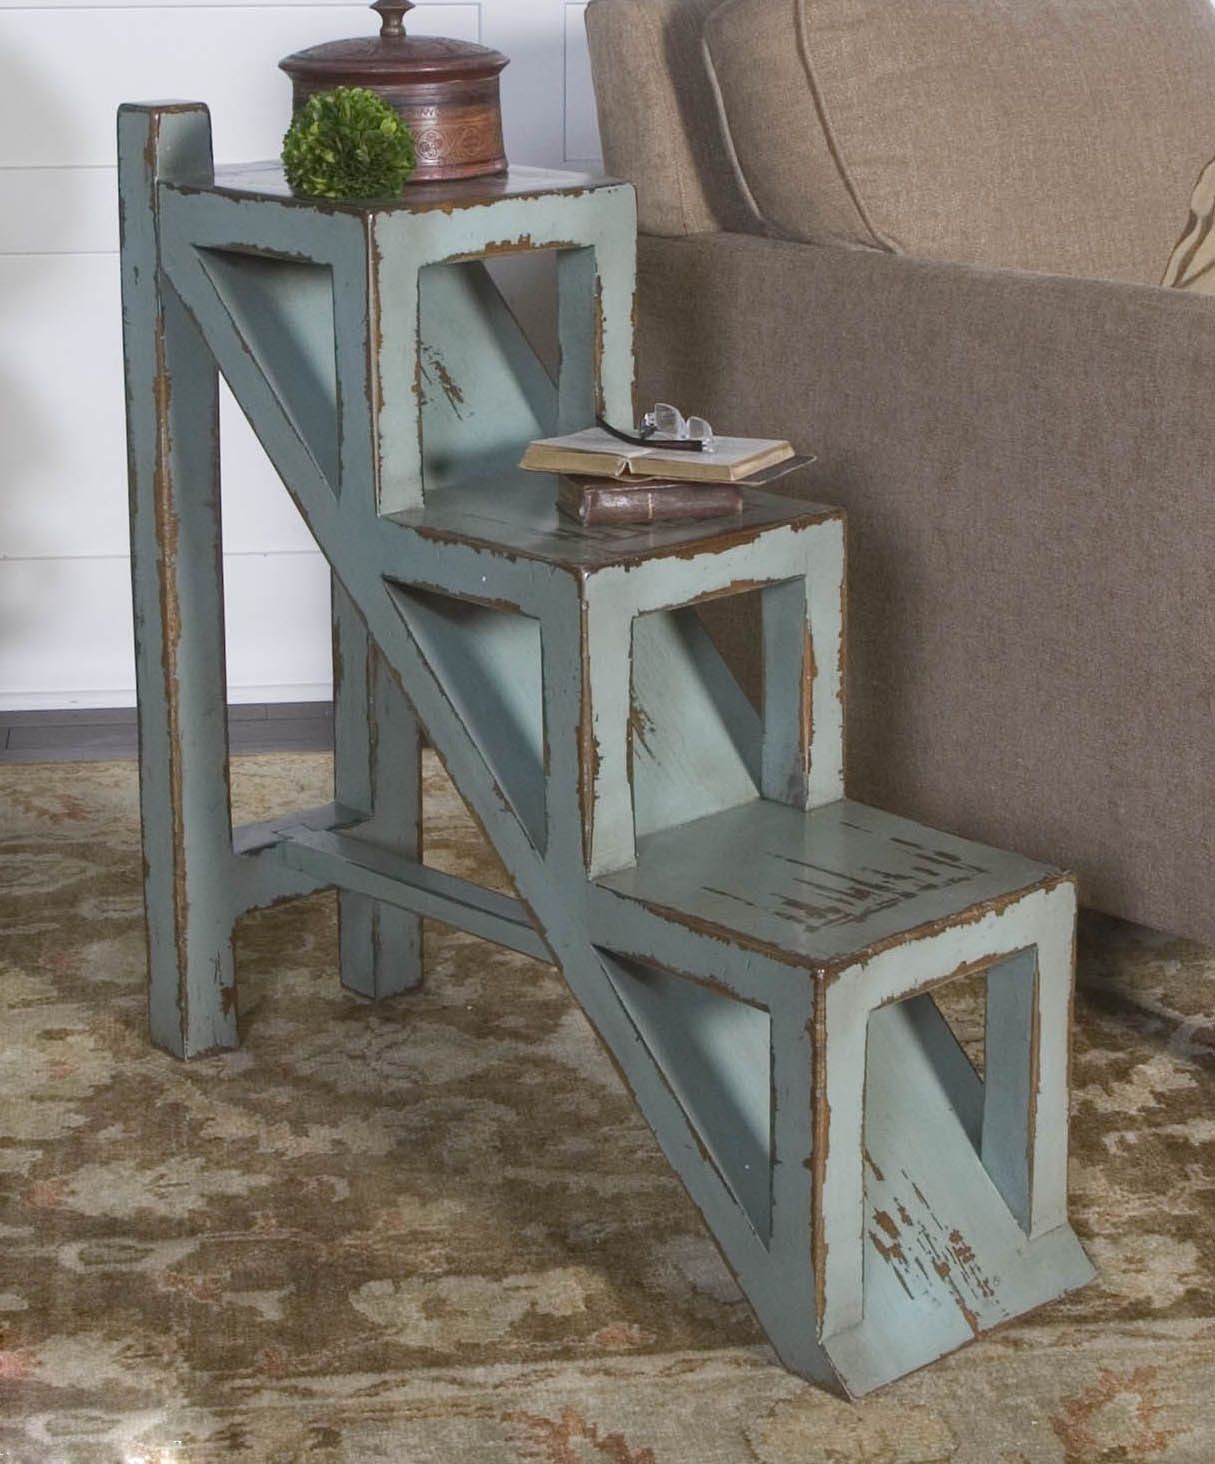 love the shape style not material looks bit chee hubby uttermost asher blue accent table can build out real wood and stain end reviews legs led desk lamp cool retro furniture